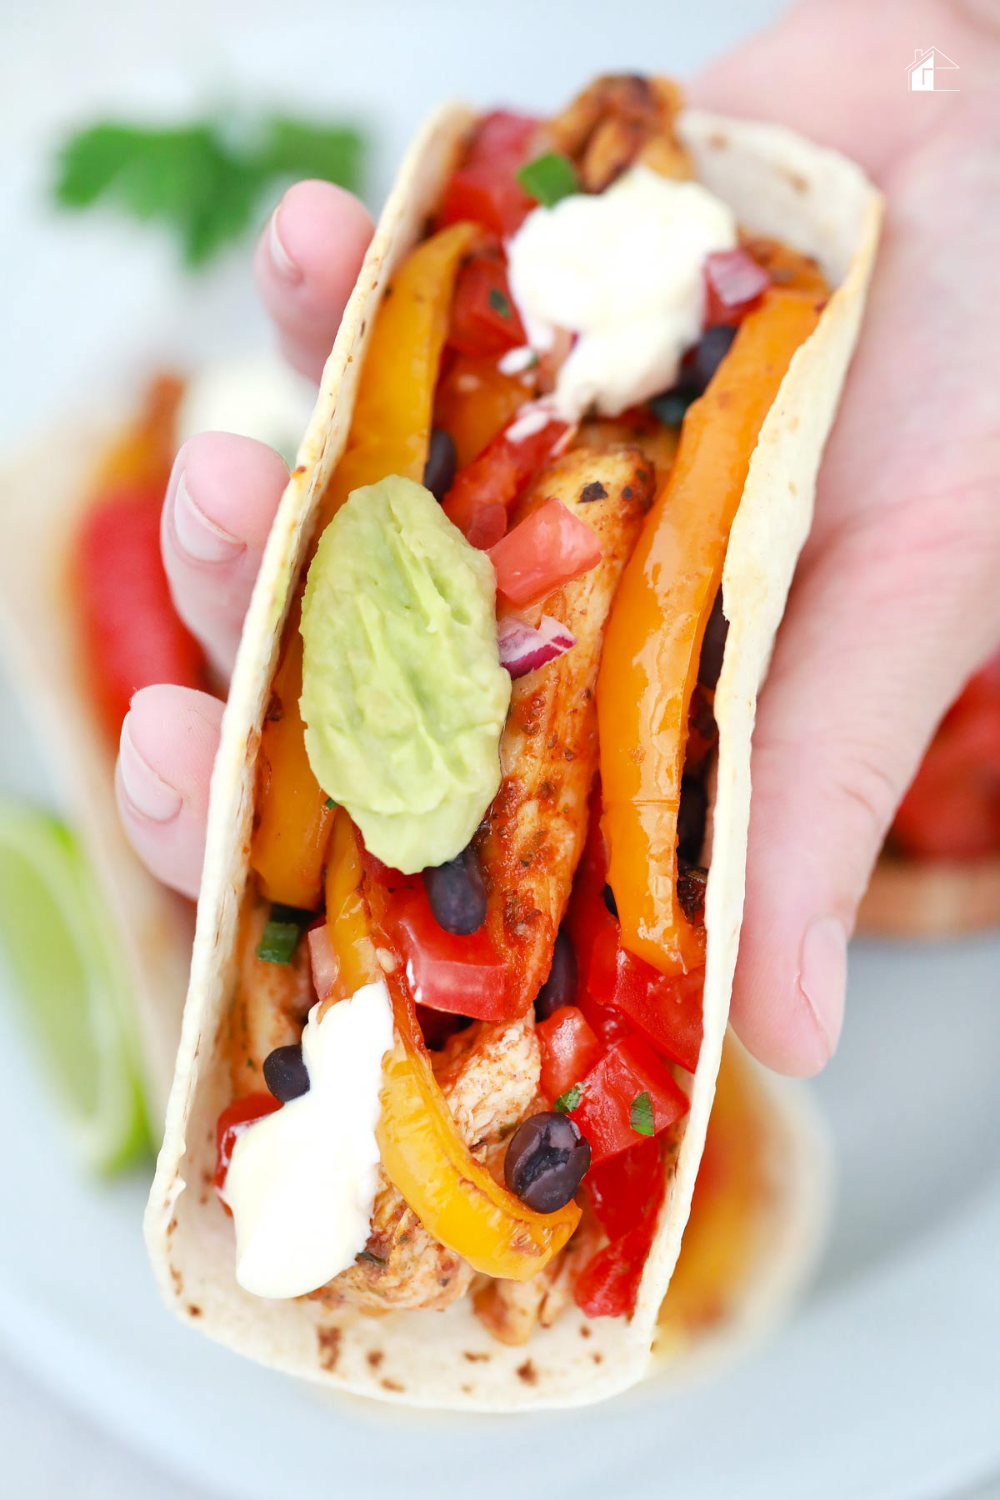 Do you love Mexican food? Check out this amazing air fryer chicken fajita recipe! It's perfect for a quick and easy meal. via @mystayathome